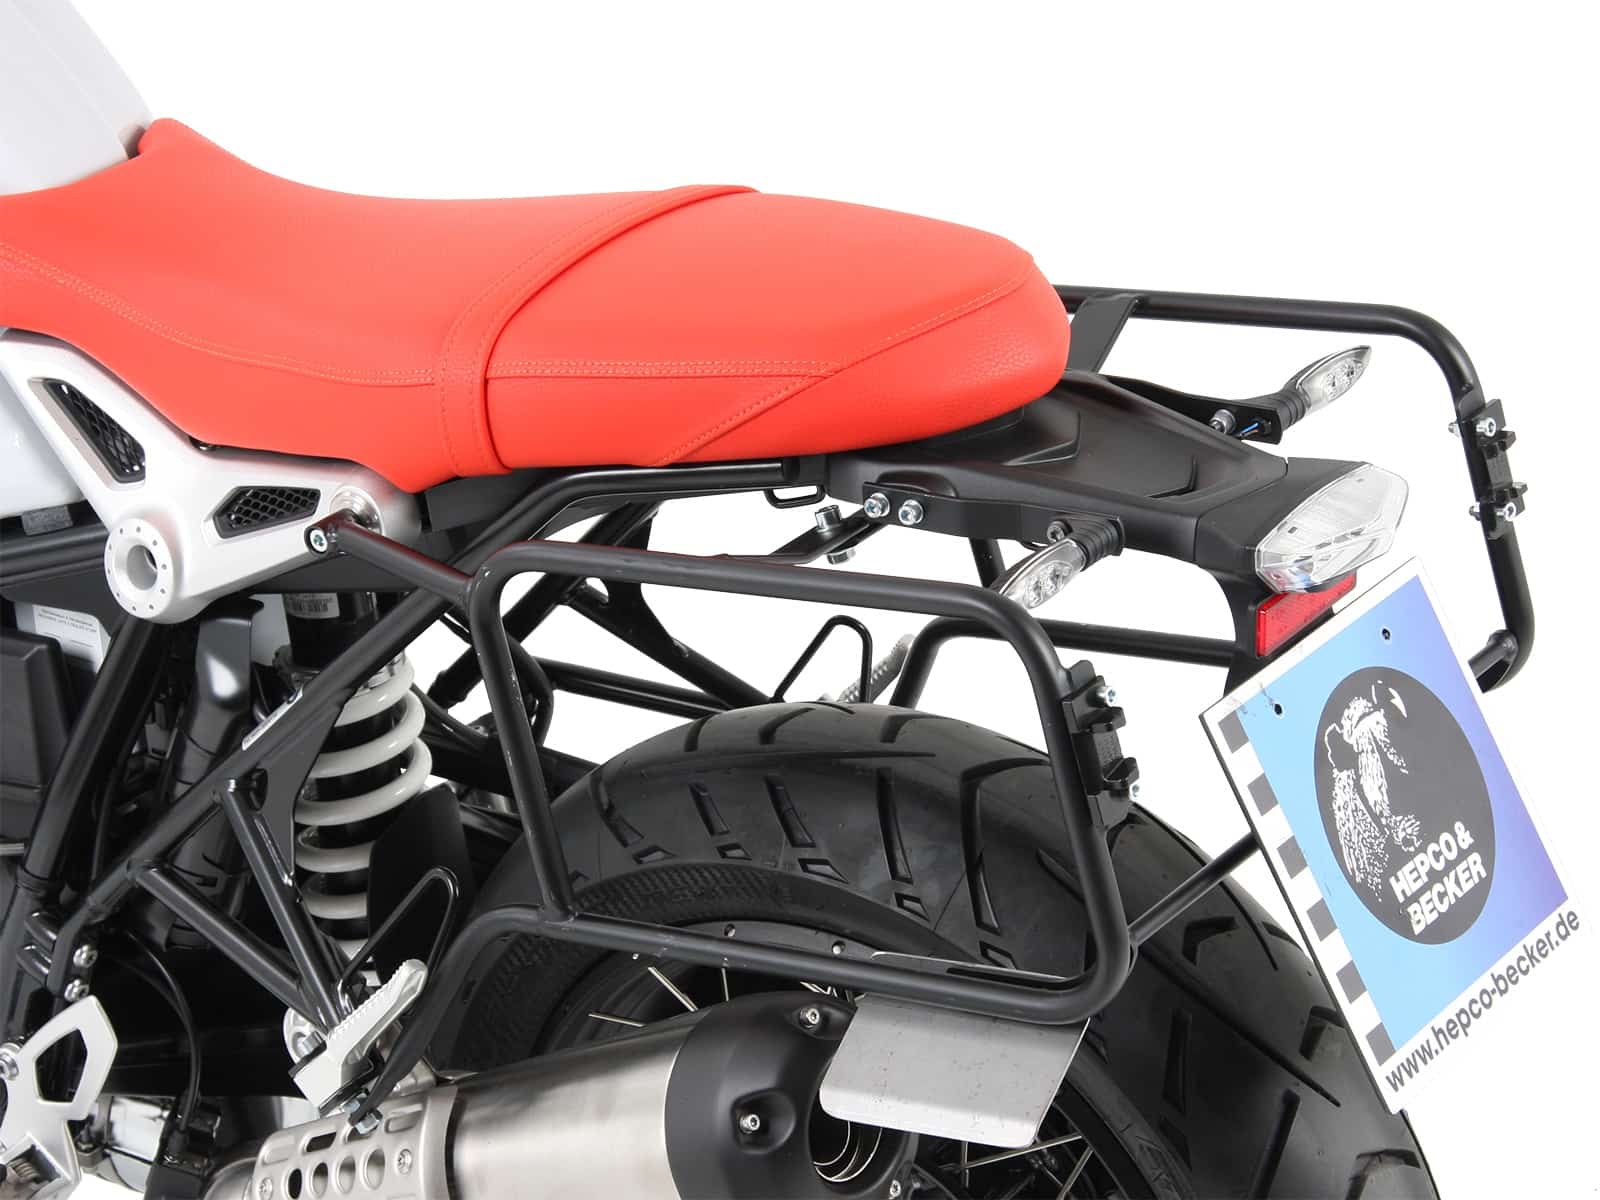 Sidecarrier permanent mounted black for BMW RnineT (2014-)